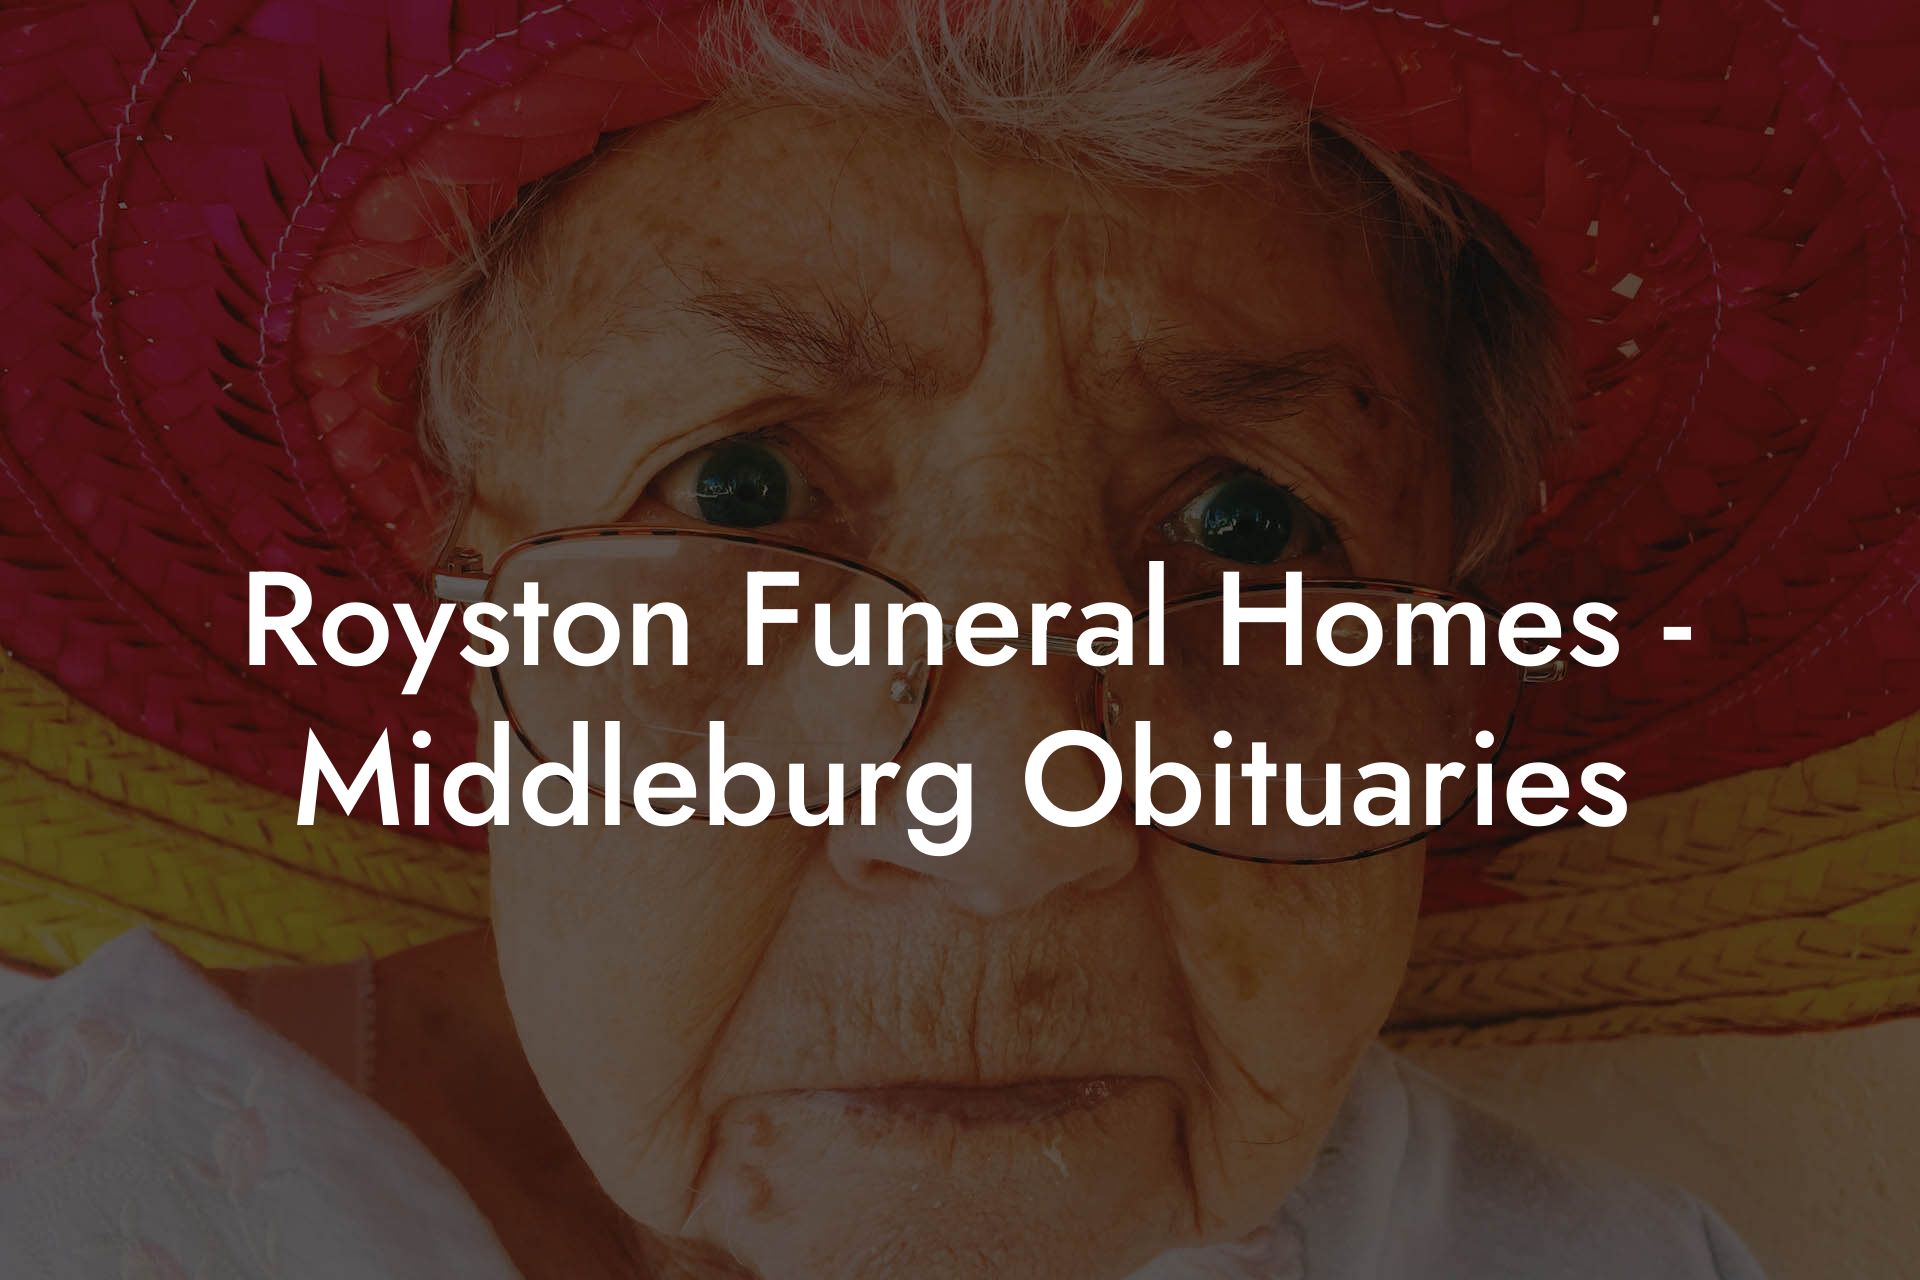 Royston Funeral Homes - Middleburg Obituaries